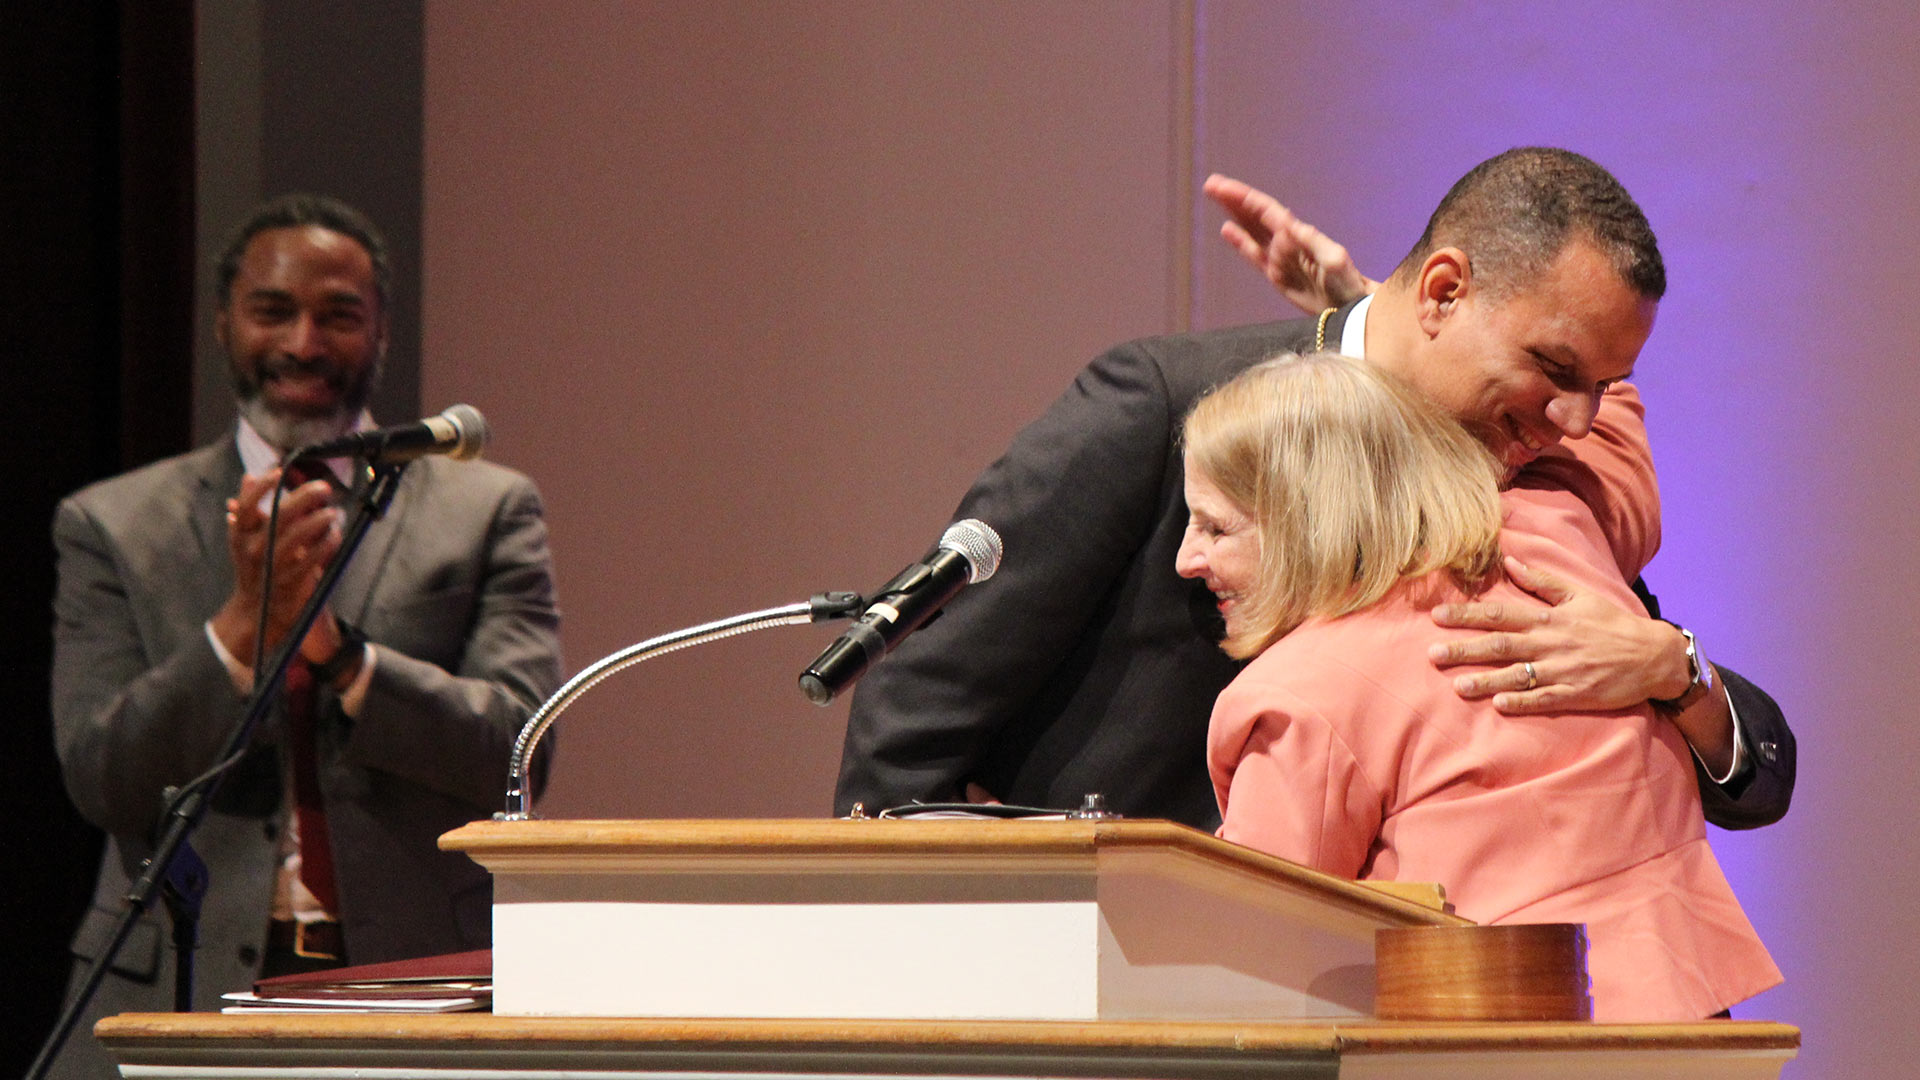 President Kyle Farmbry and Board of Trustees Chair Ione Taylor embrace onstage.